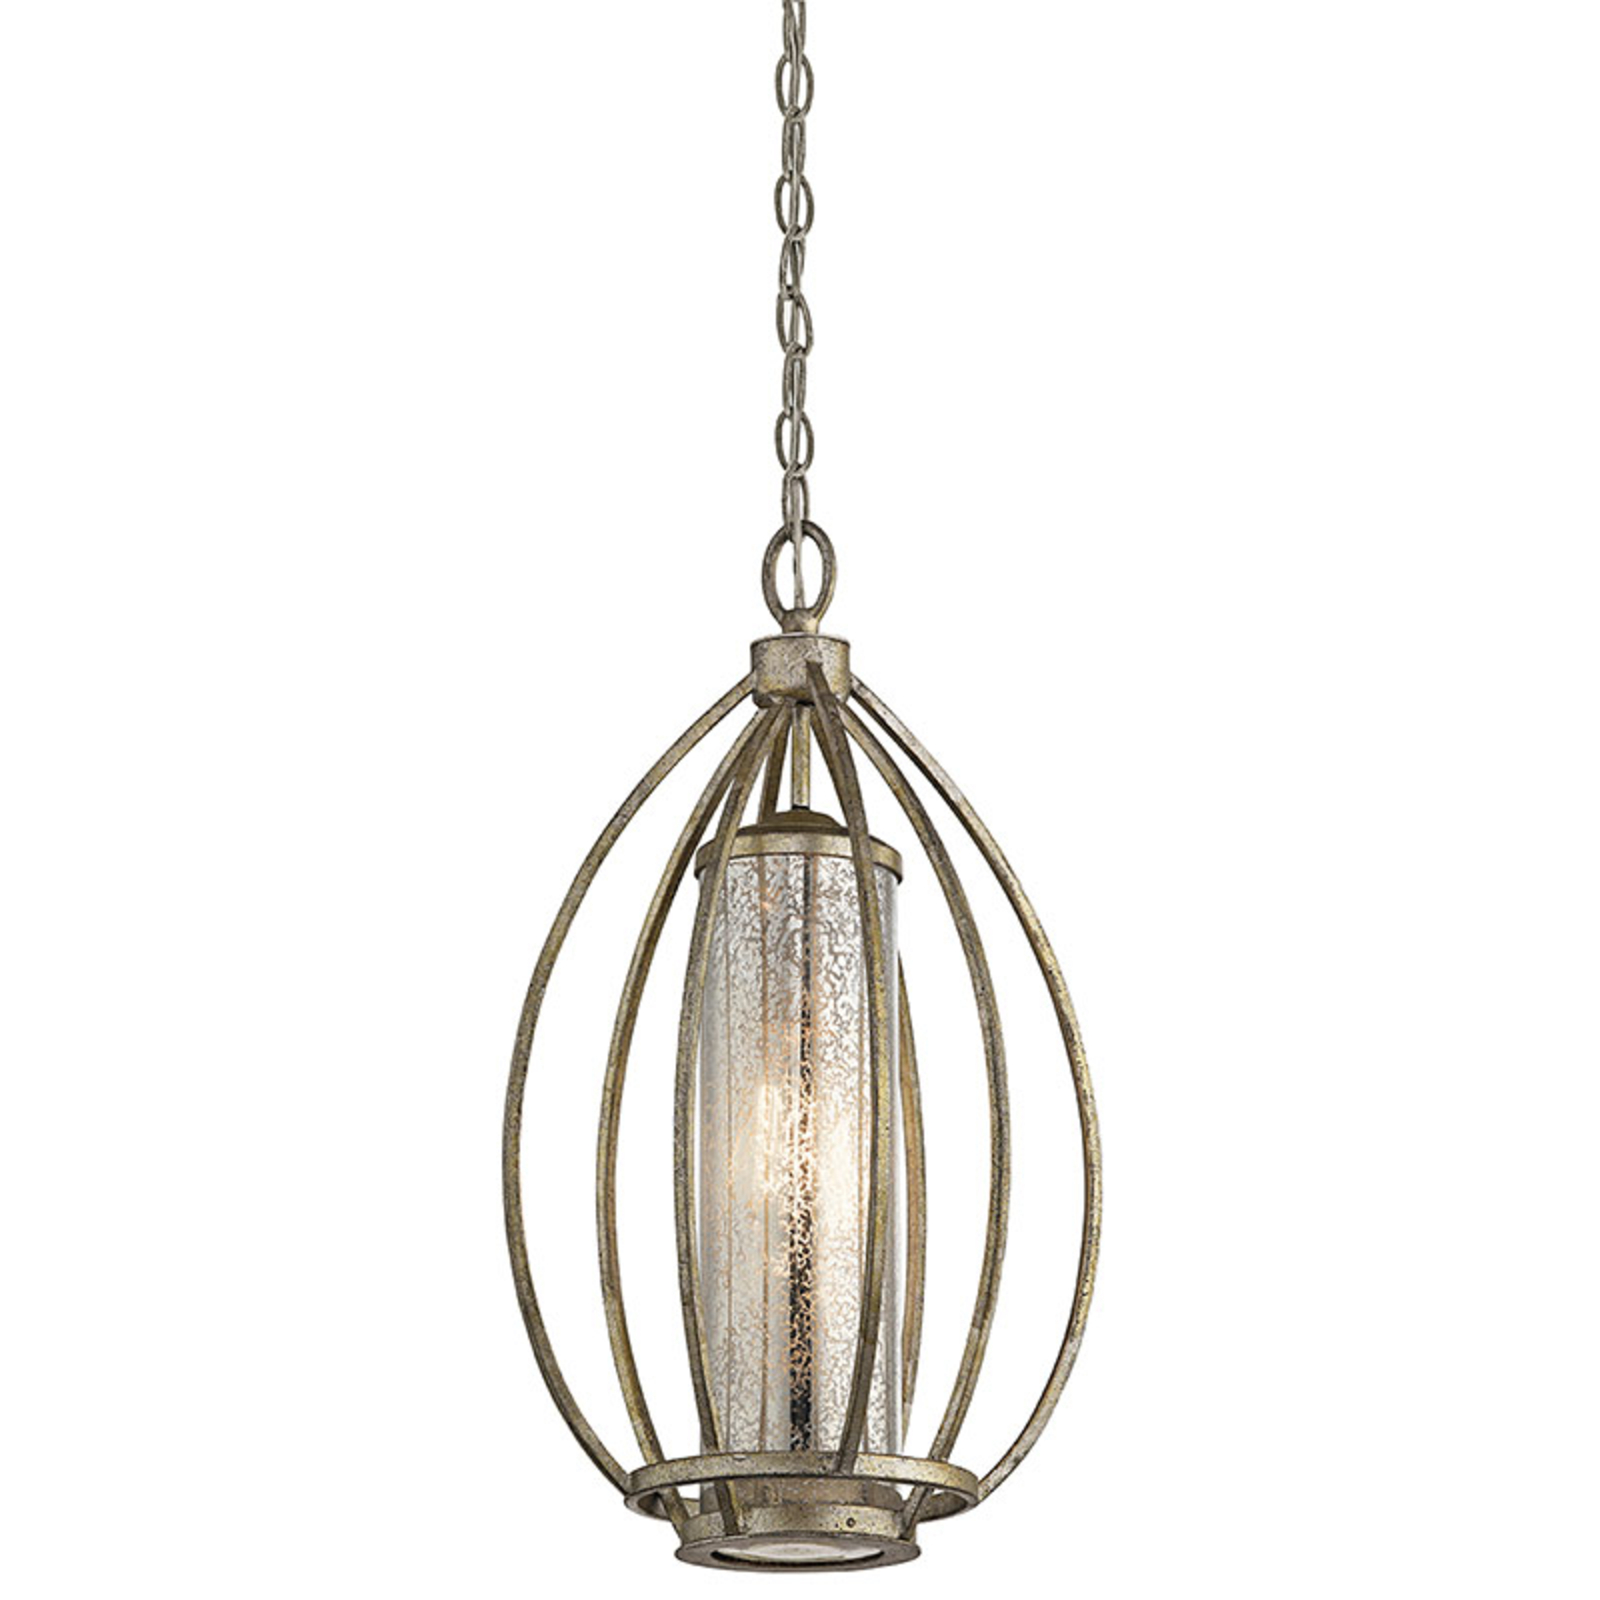 Rosalie hanging lamp with a gold finish